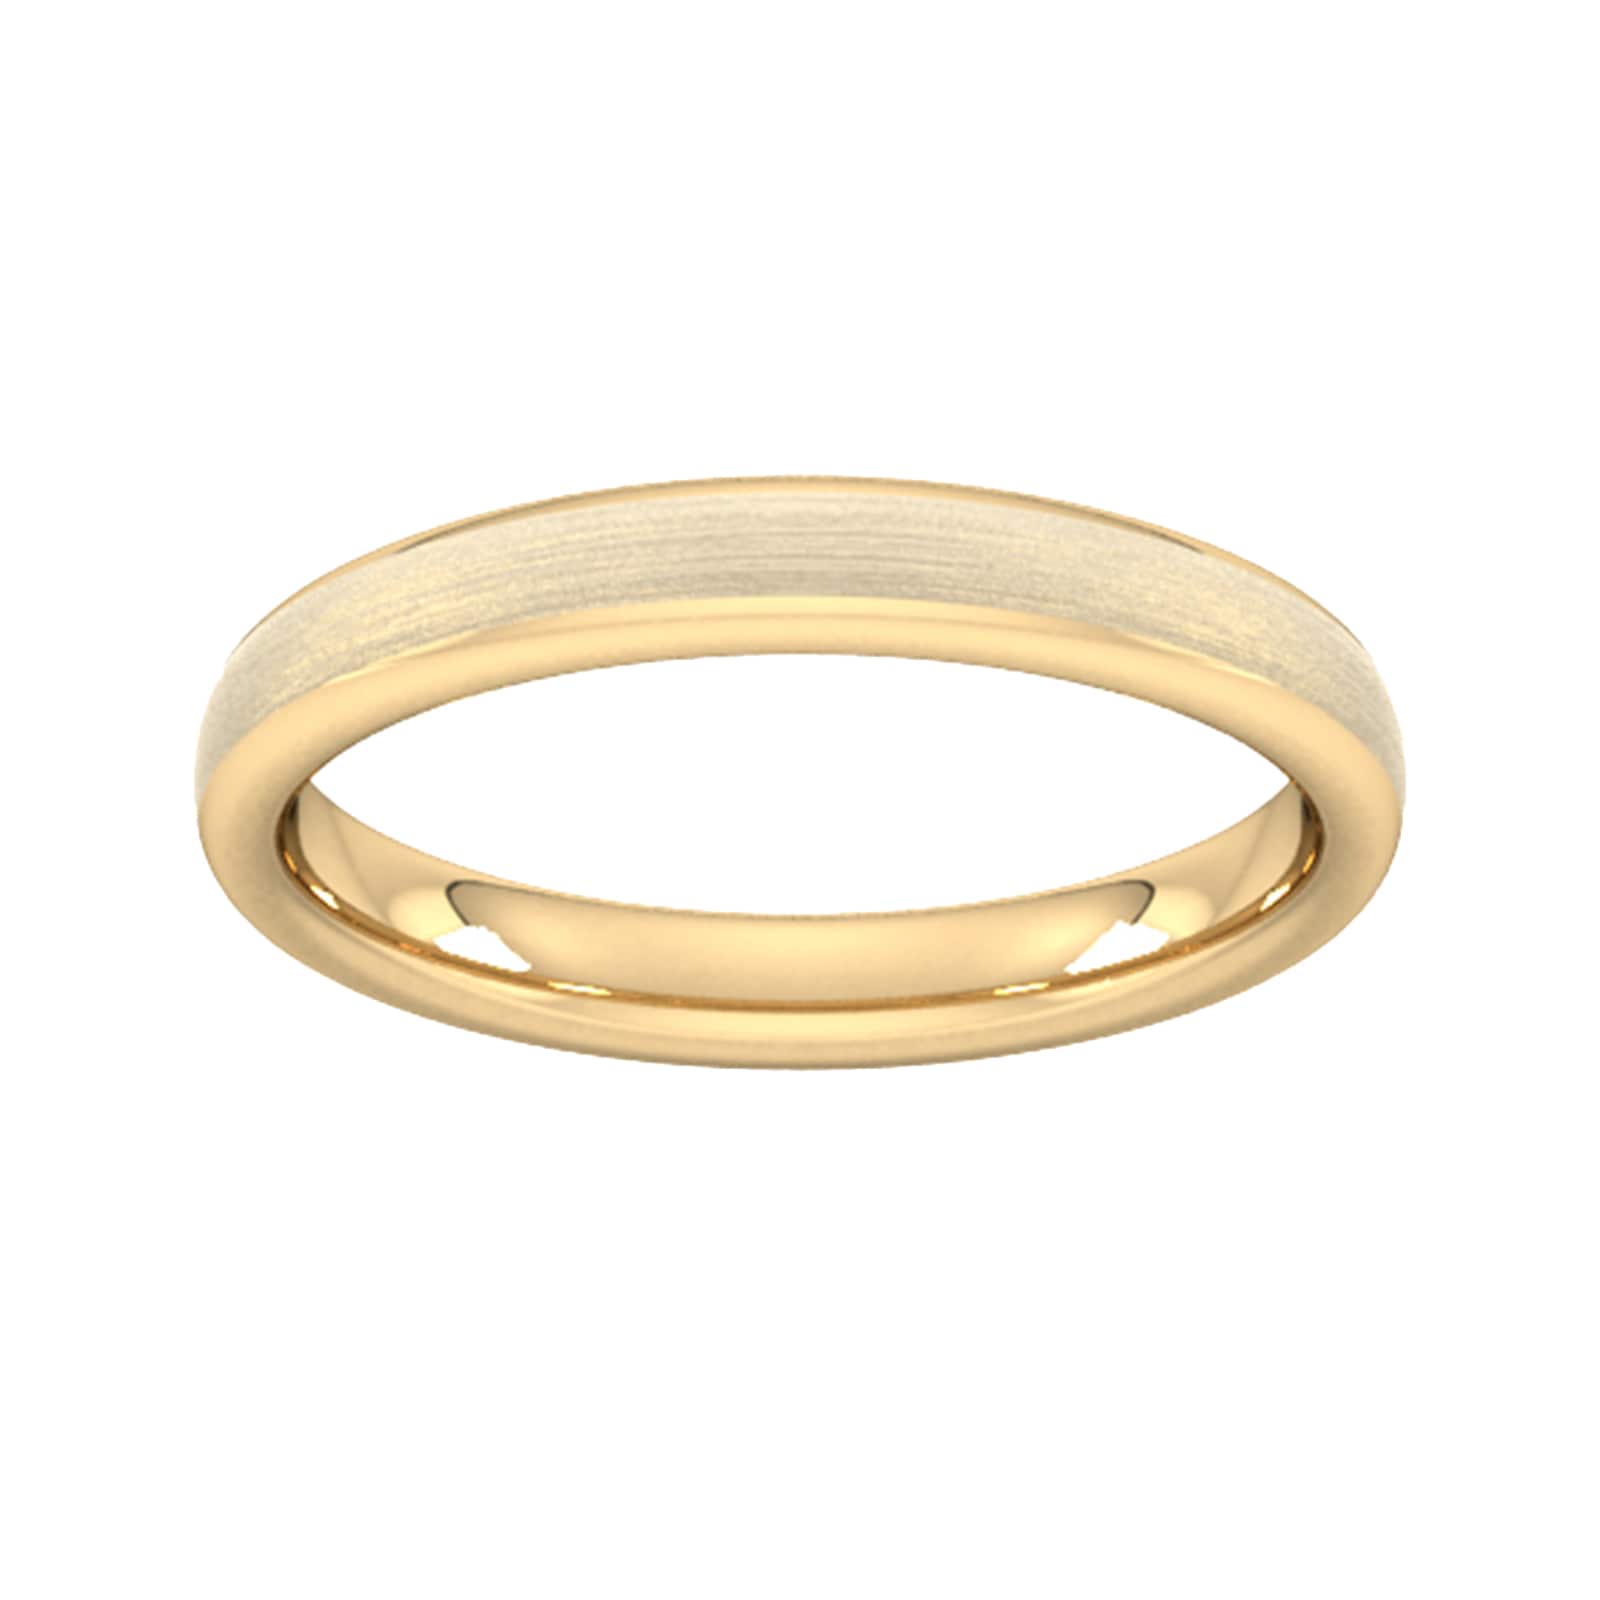 3mm D Shape Standard Matt Finished Wedding Ring In 18 Carat Yellow Gold - Ring Size O